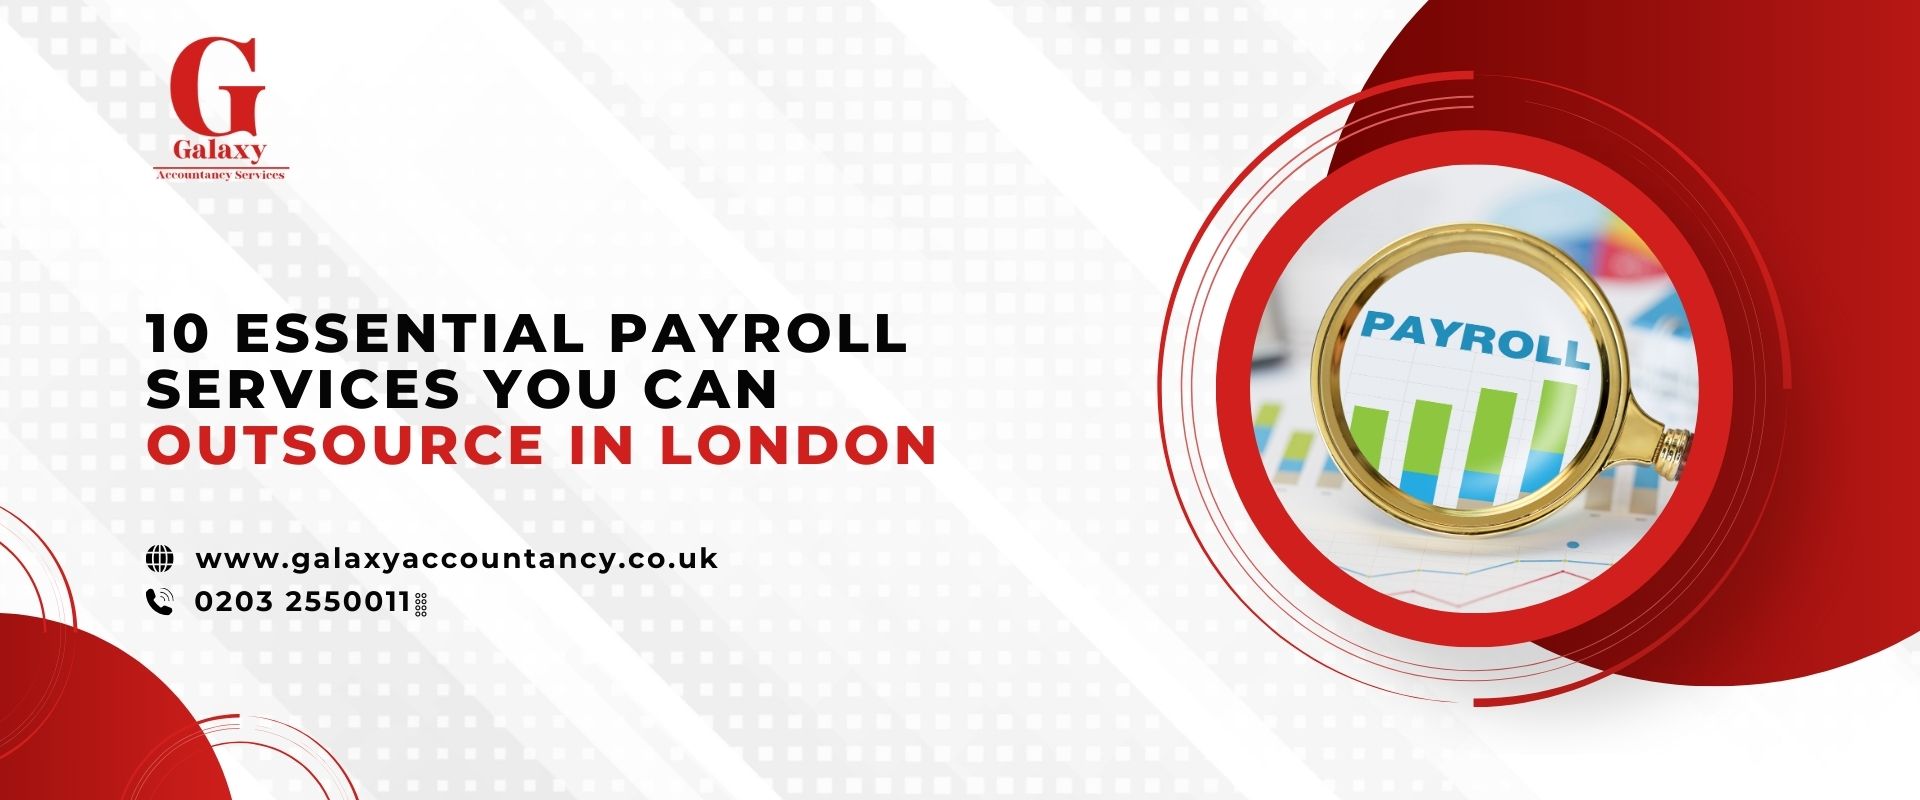 You are currently viewing 10 Essential Payroll Services You Can Outsource in London